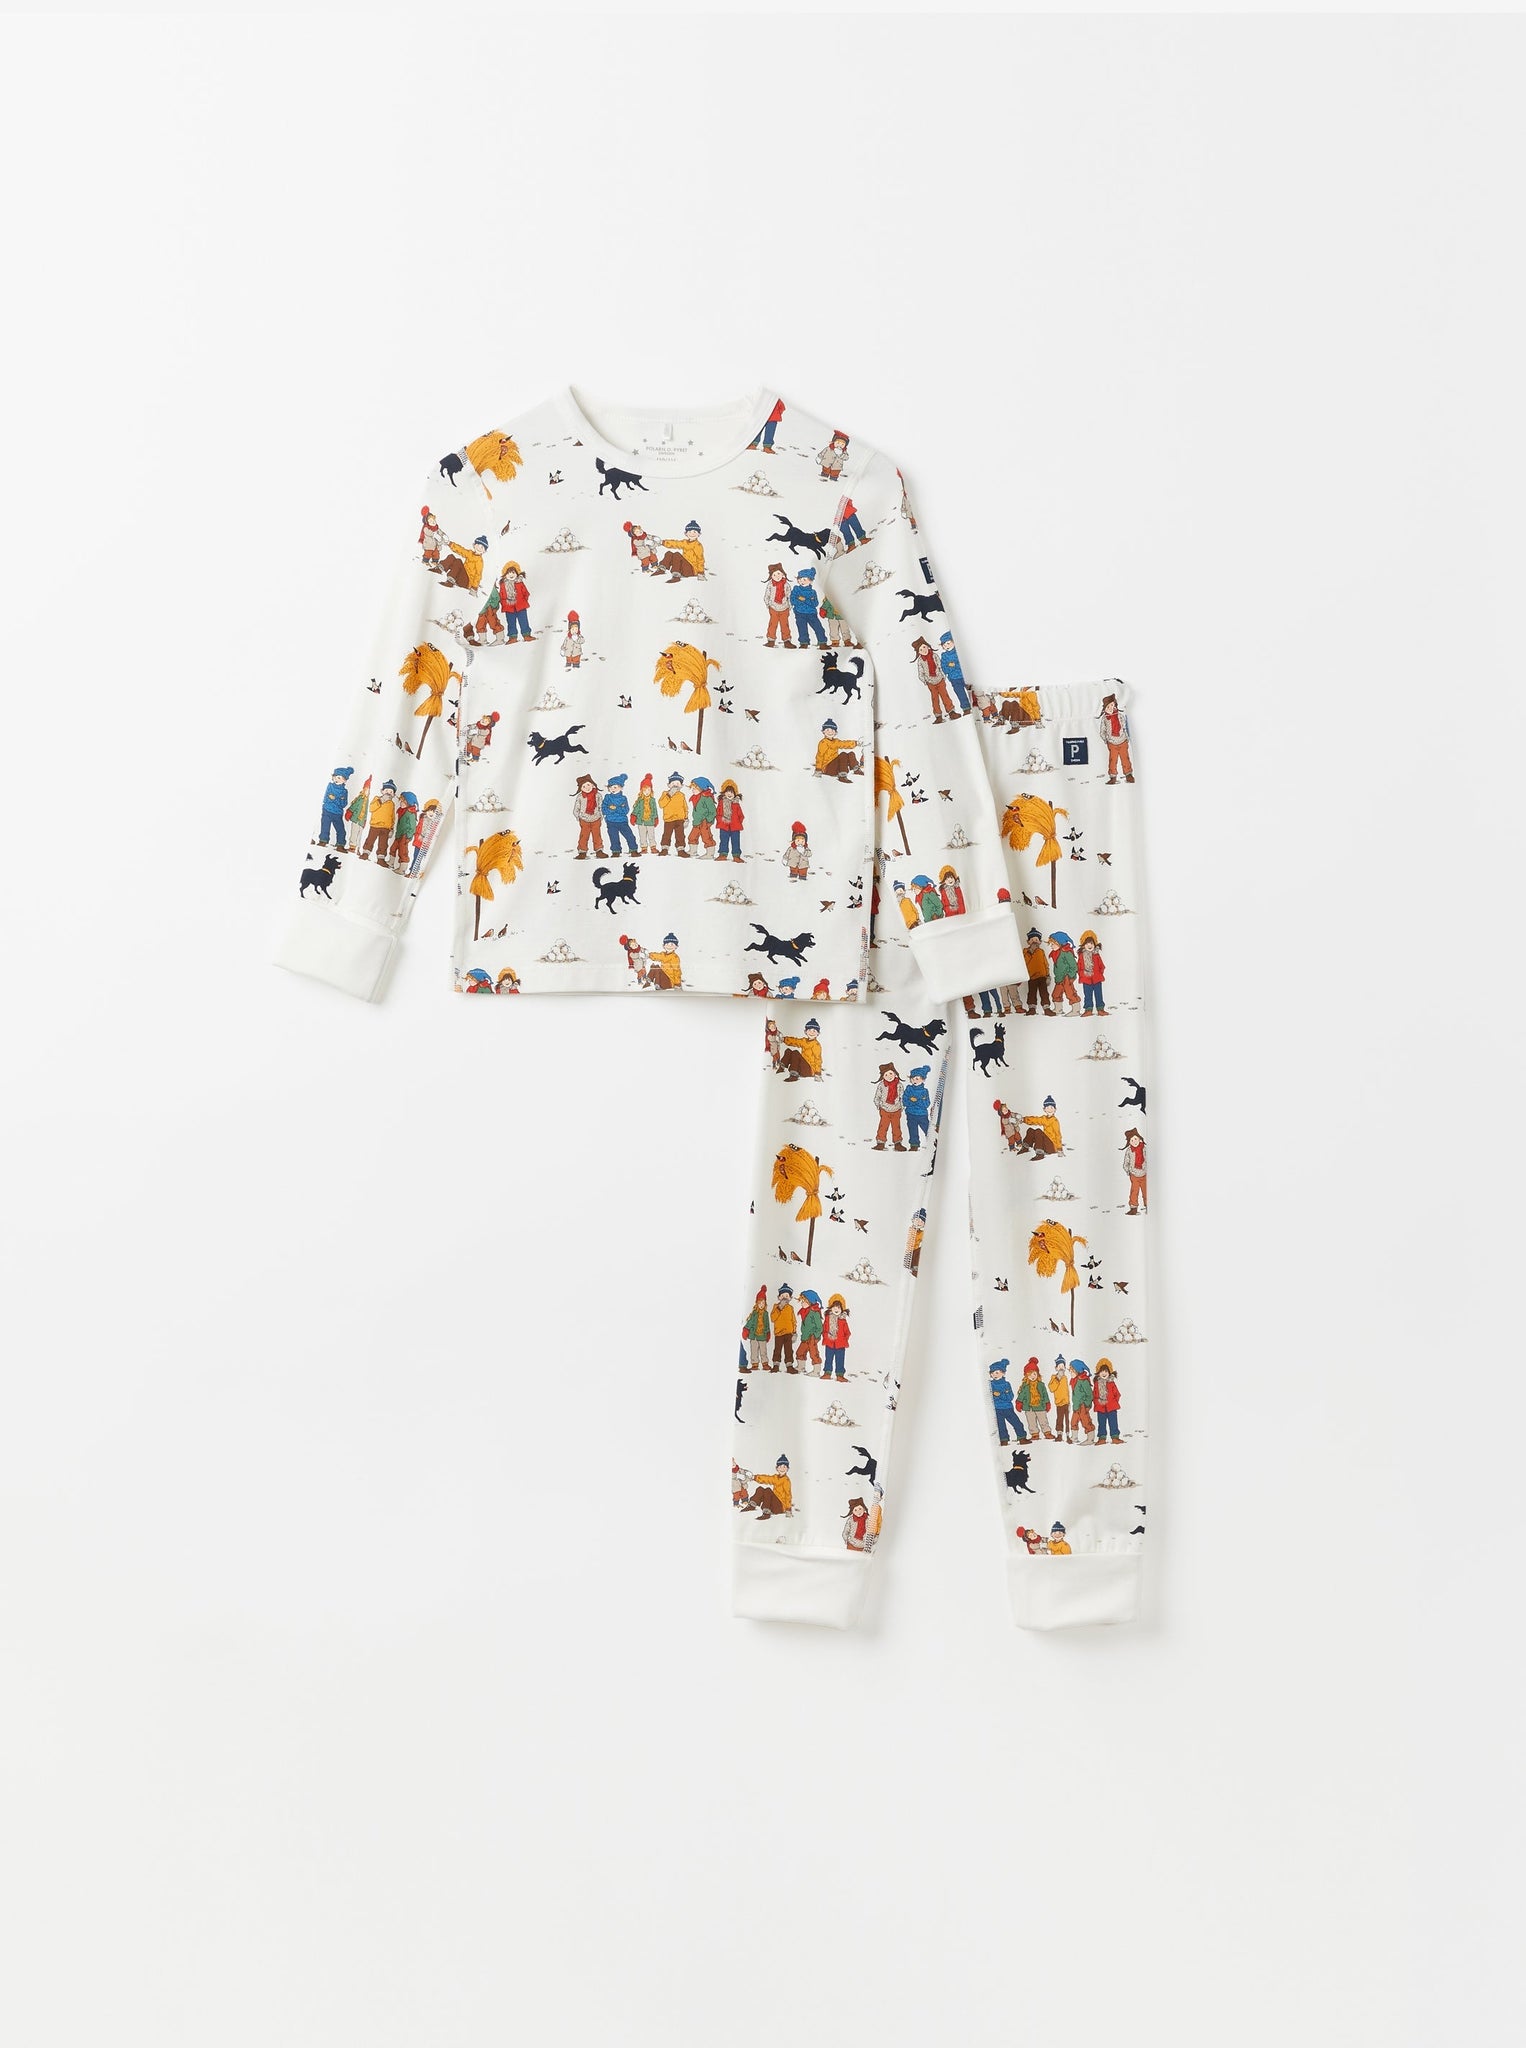 Nordic Winter White Kids Pyjamas from the Polarn O. Pyret kidswear collection. Clothes made using sustainably sourced materials.